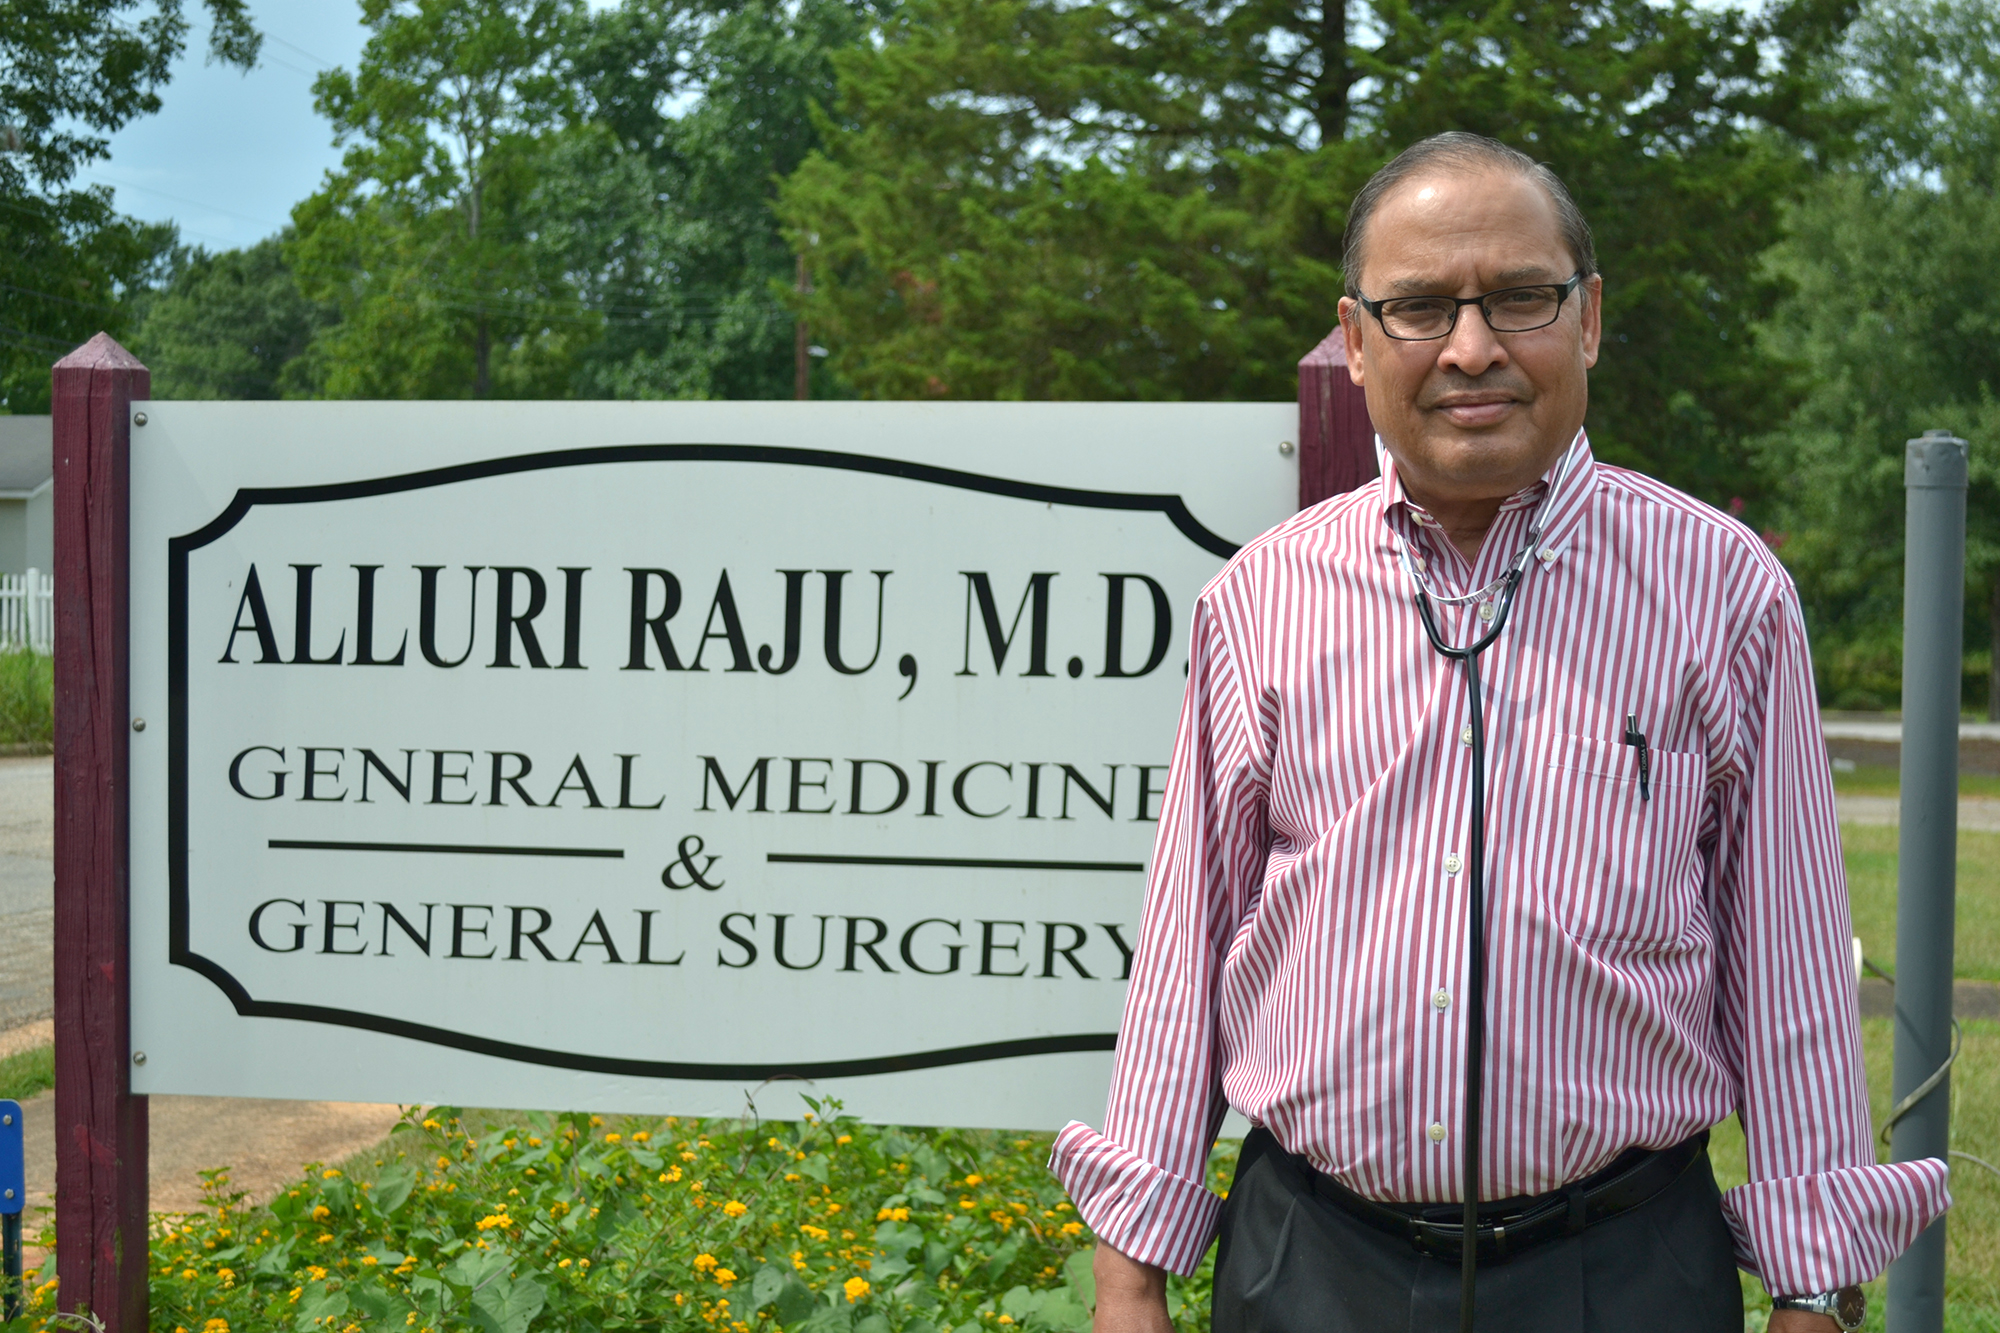 PHOTO: Dr. Alluri Raju, who has been practicing in the rural Georgia town of Richland for 37 years, said he initially faced discrimination, but that has dissipated. He is now the only doctor in town.